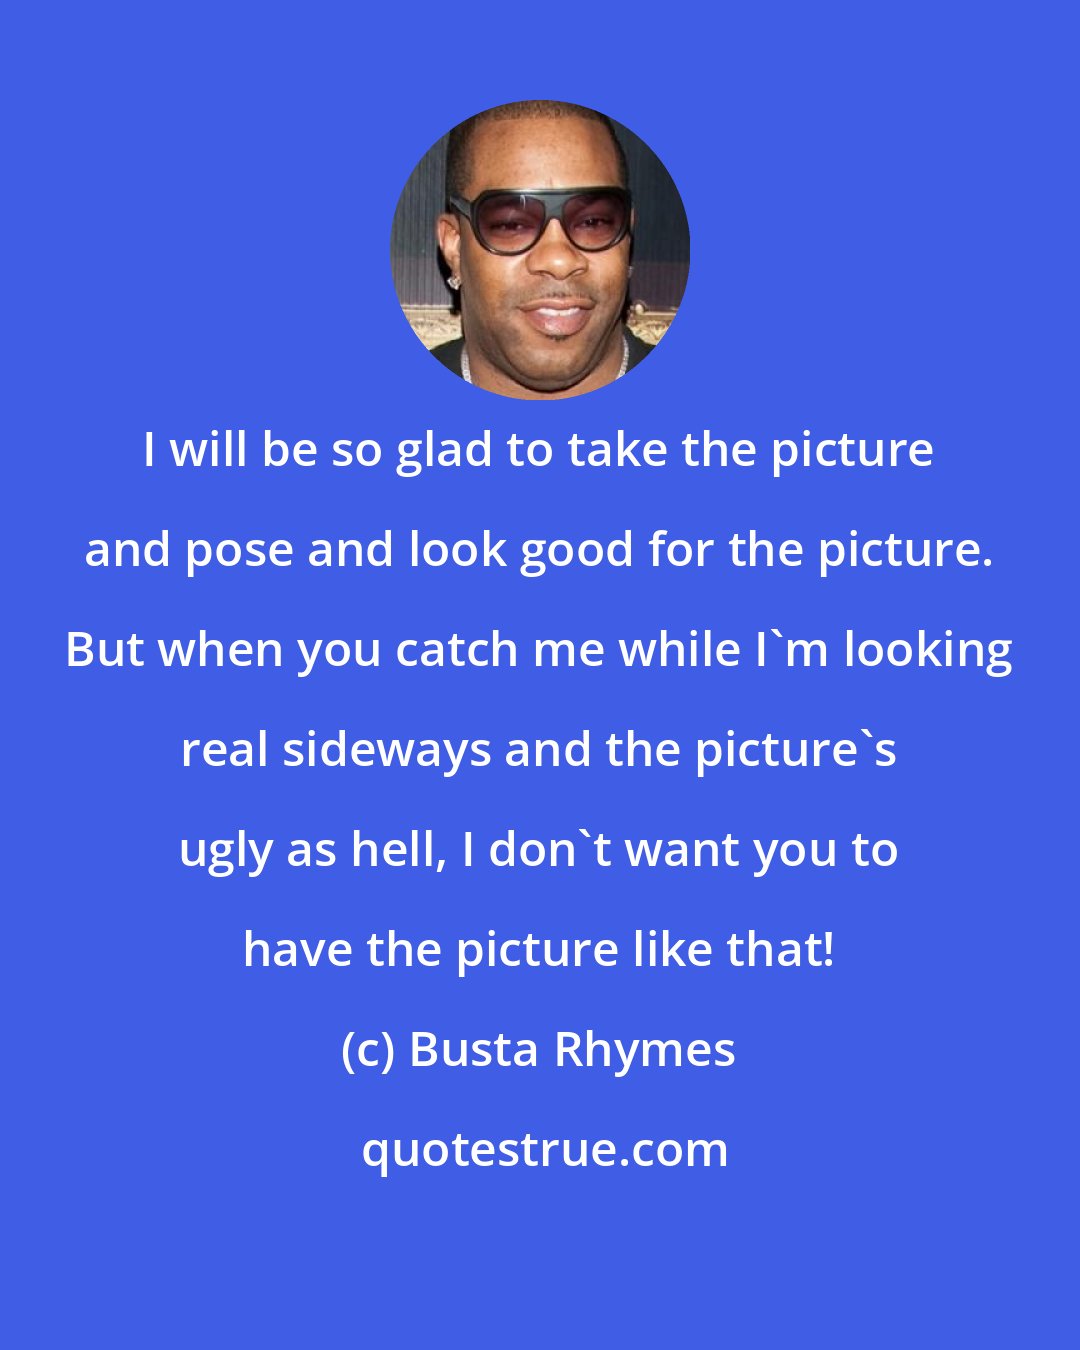 Busta Rhymes: I will be so glad to take the picture and pose and look good for the picture. But when you catch me while I'm looking real sideways and the picture's ugly as hell, I don't want you to have the picture like that!